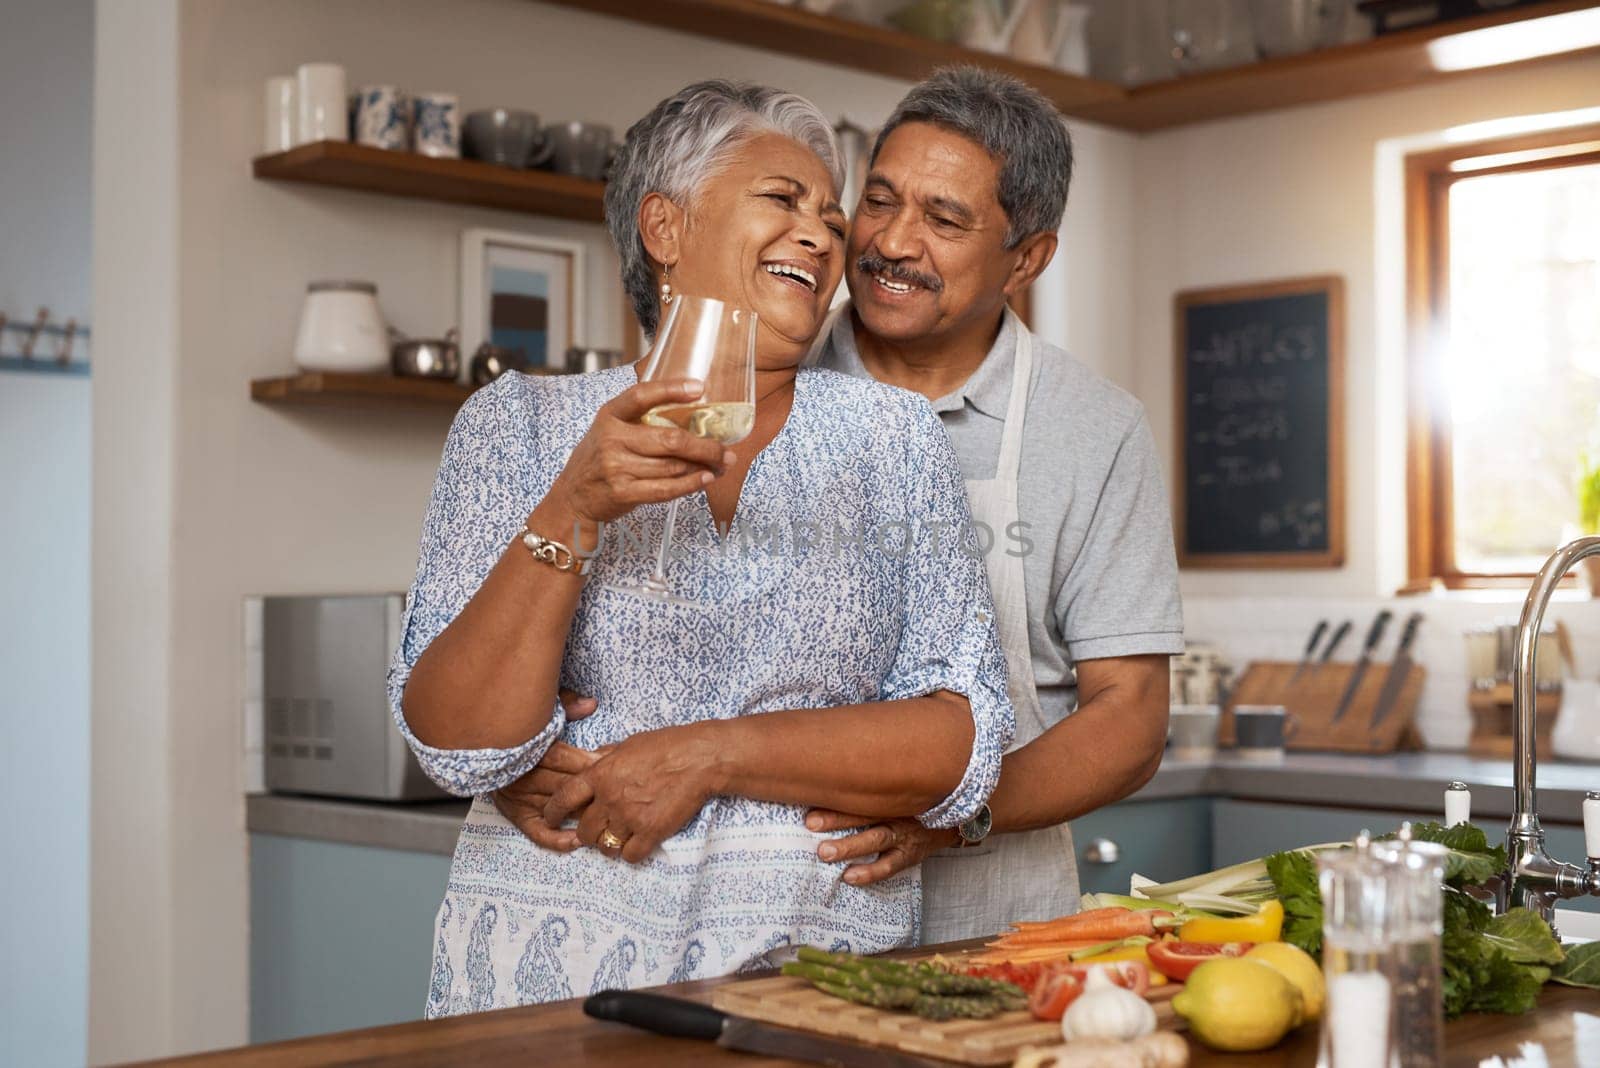 Hug, old woman and man in kitchen with wine glass, happiness and cooking healthy vegetable dinner together. Smile, love and food, happy senior couple in retirement with drink, vegetables and wellness by YuriArcurs